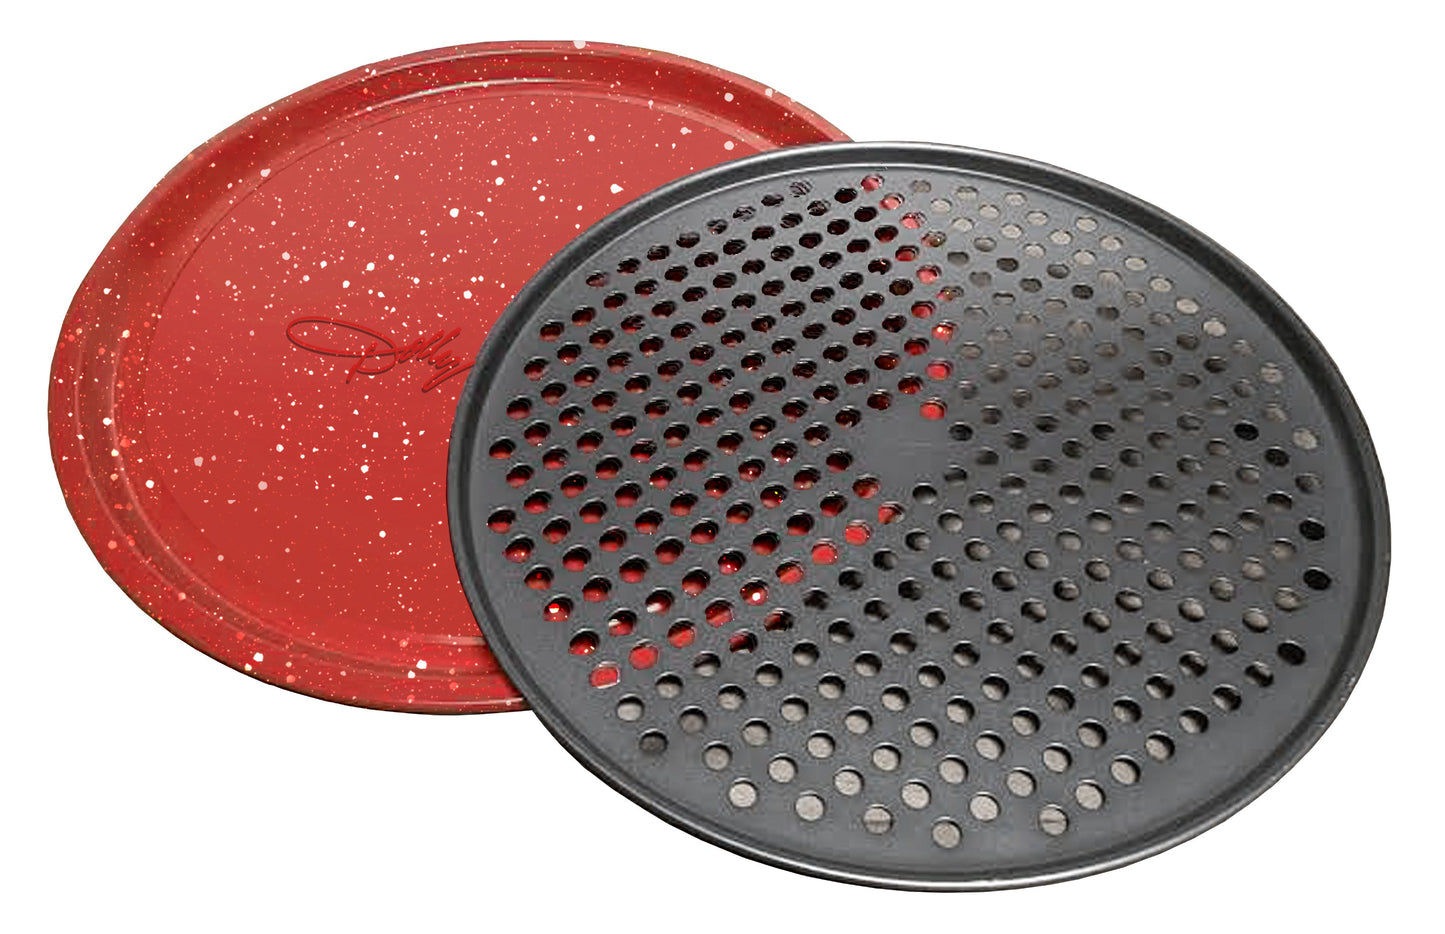 DOLLY 13.75" ROUND PIZZA PAN WITH PIZZA CRISPER - RED